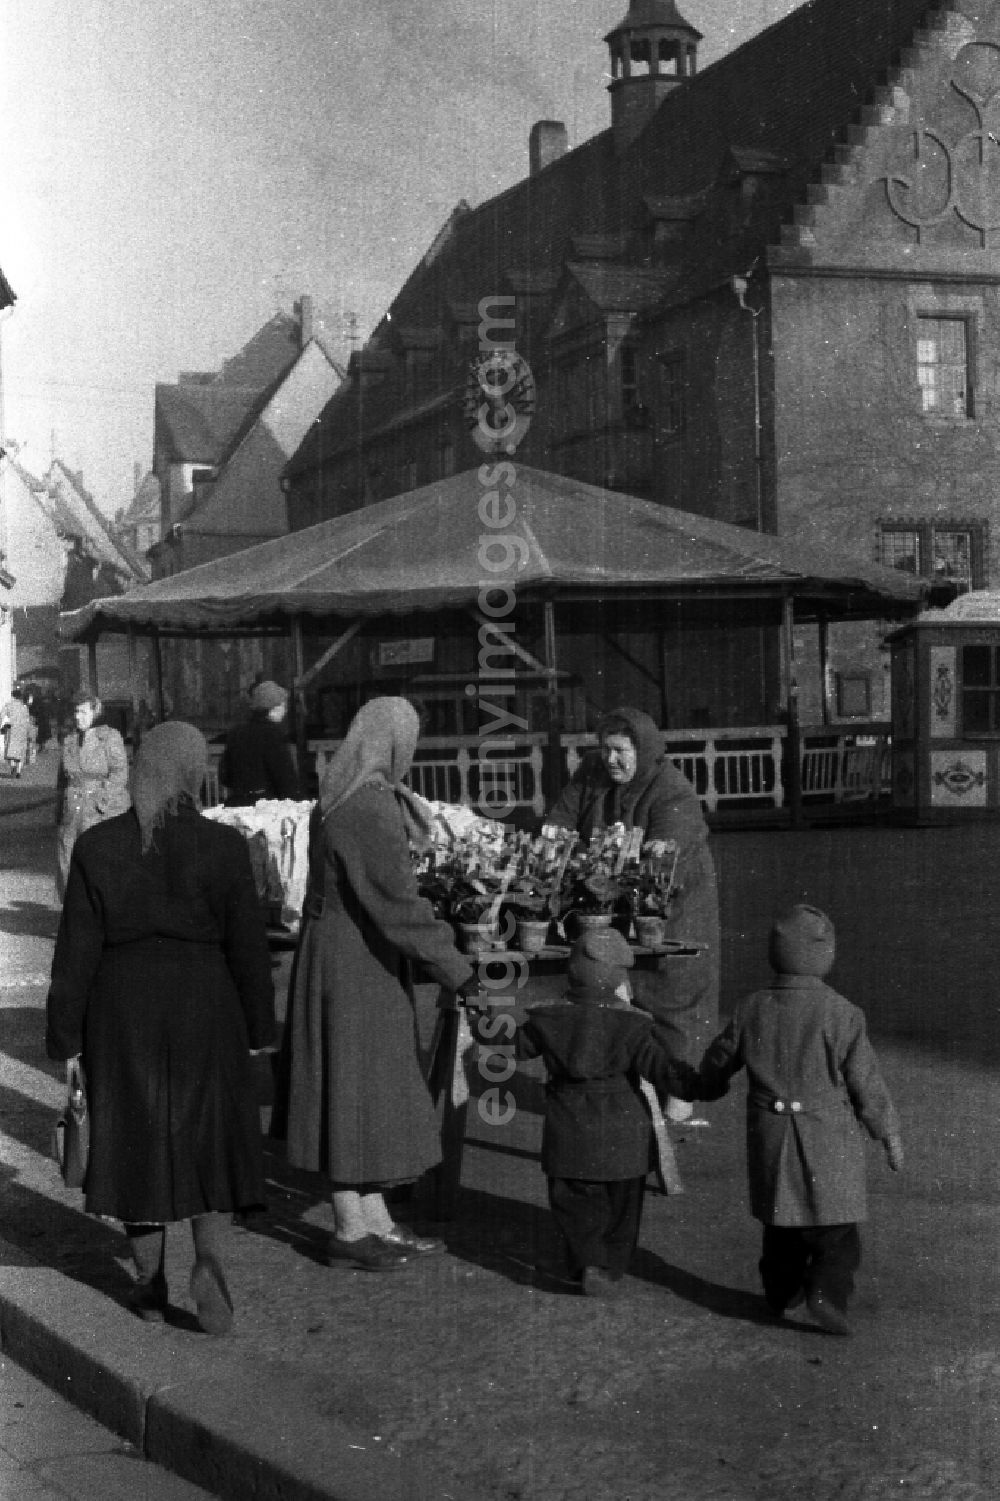 GDR photo archive: Merseburg - Market stall - stand on the marketplace in Merseburg in the federal state Saxony-Anhalt in Germany